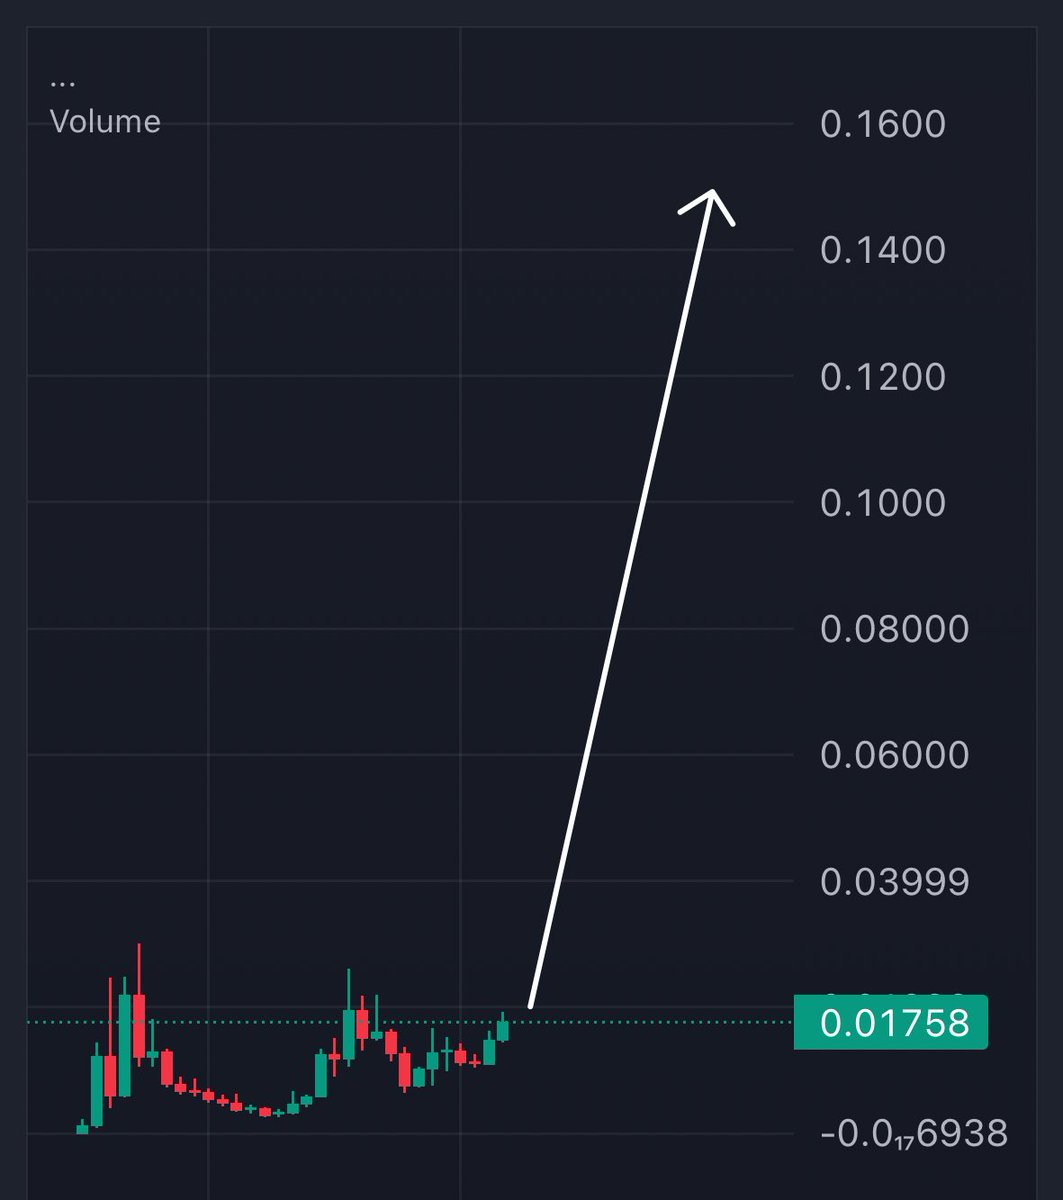 Most of you are not ready for how high #Grok is going to run.

Zoom out and you’ll notice the previous ATH will be merely a blip on the chart in the weeks to come.